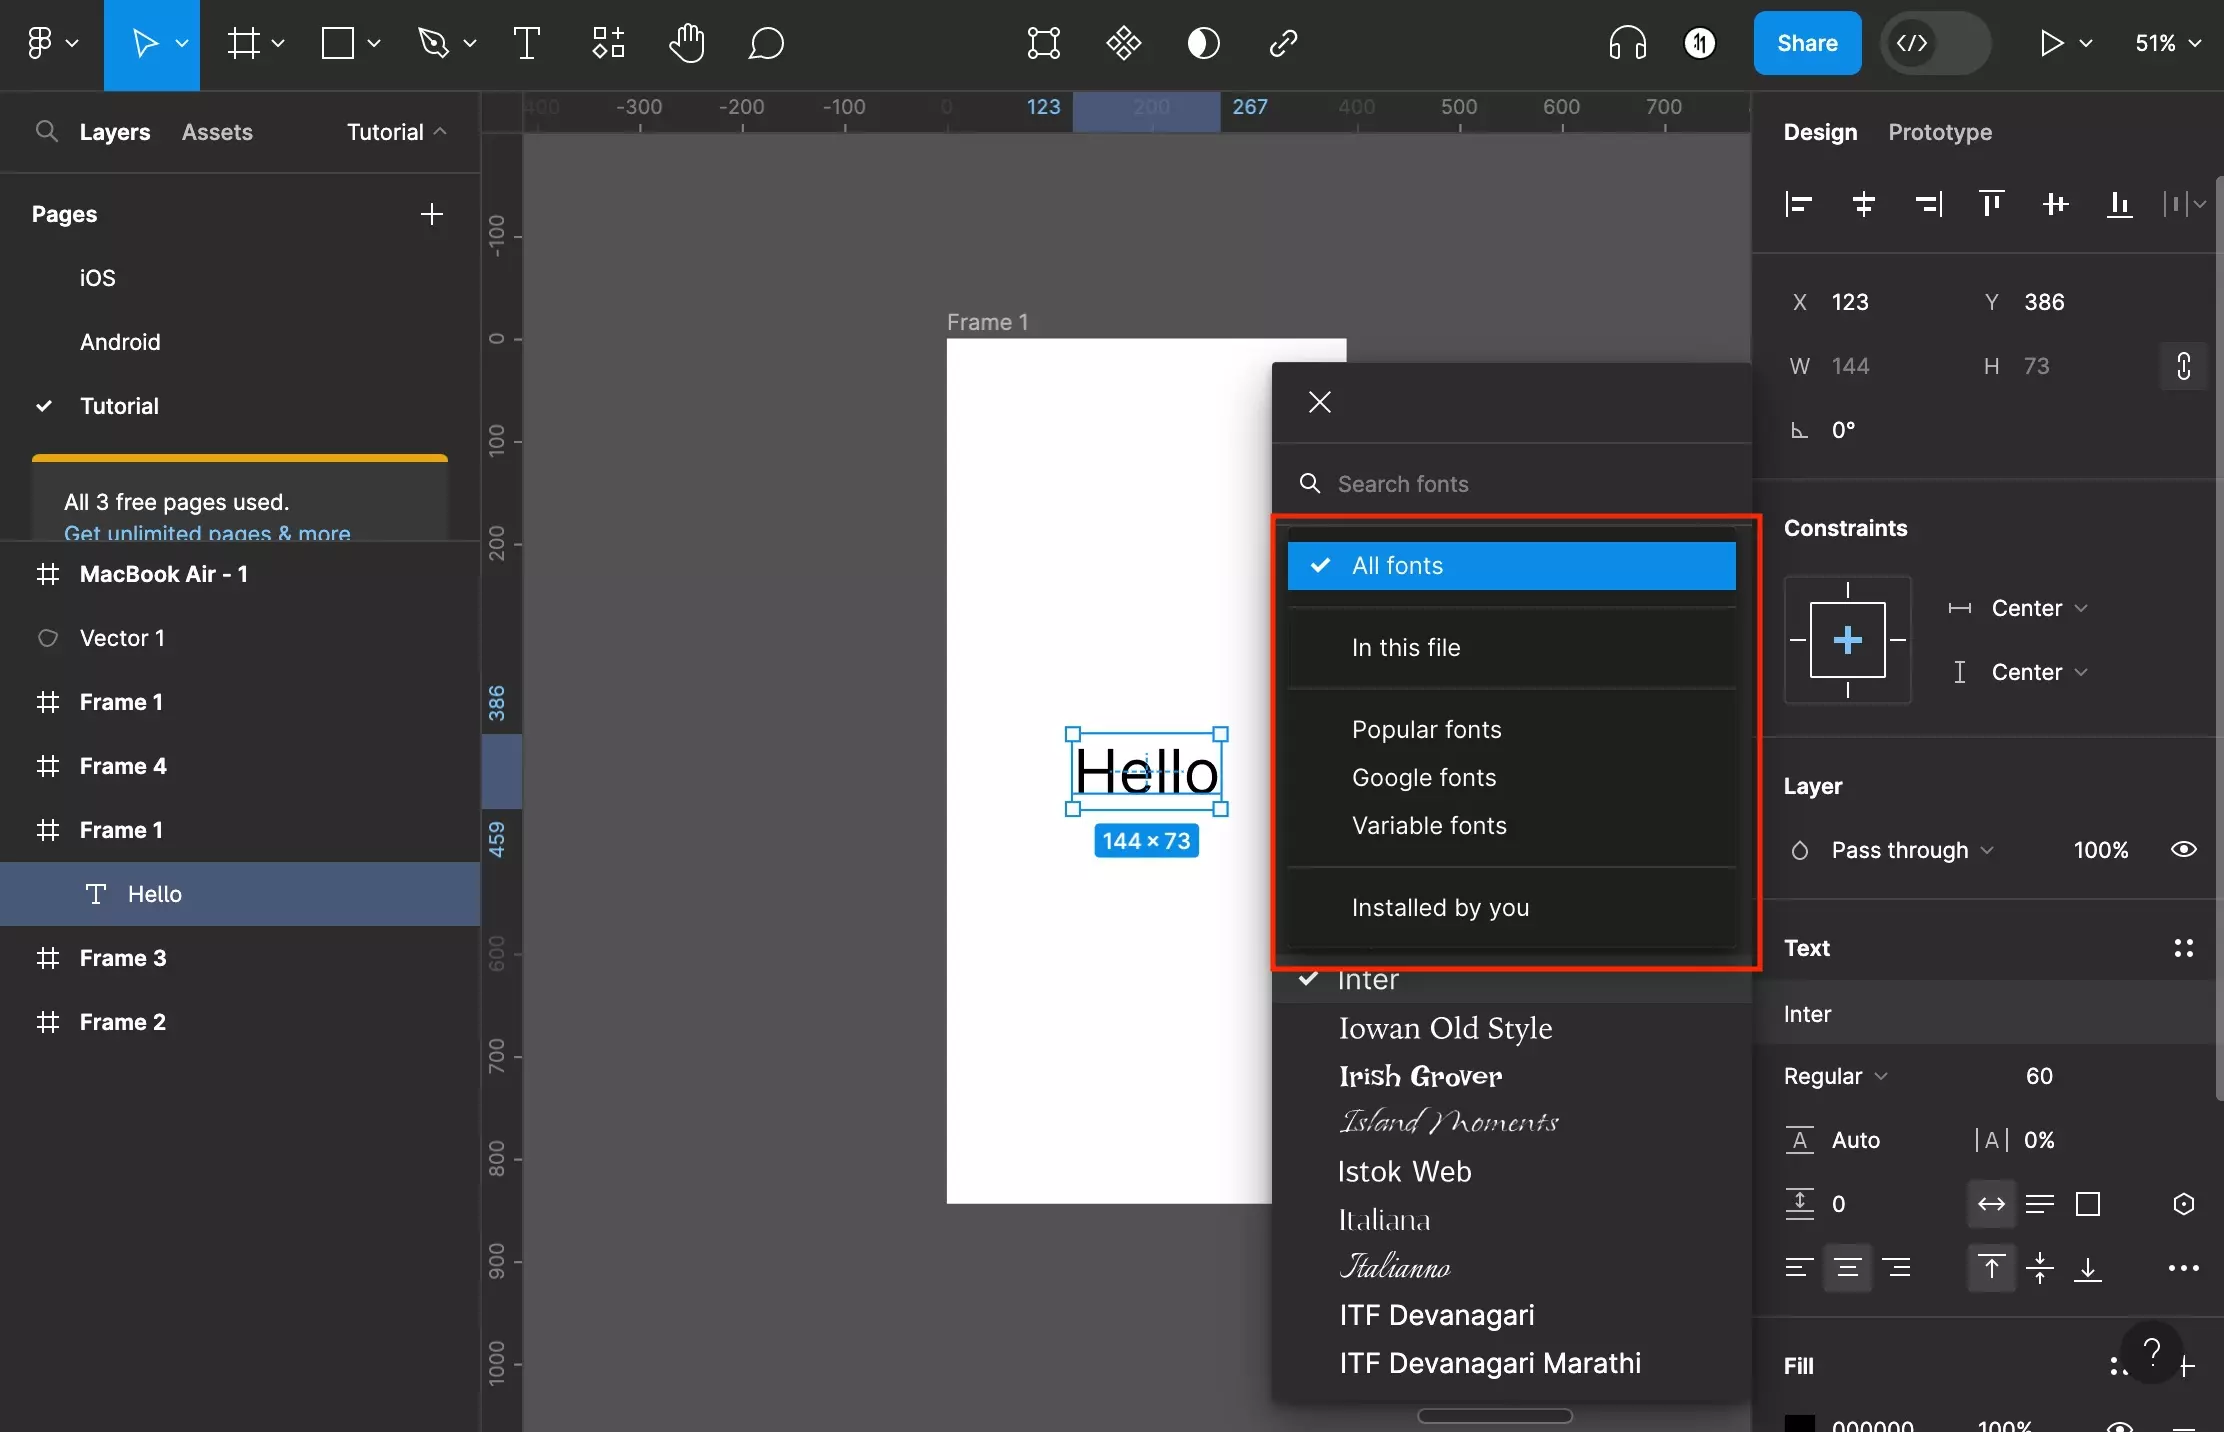 A screenshot of Figma that shows you a frame with text on it. The filter fonts dropdown is open. The options on the dropdown are All Fonts, In this File, Popular Fonts, Google Fonts, Variable Fonts and Installed by You.